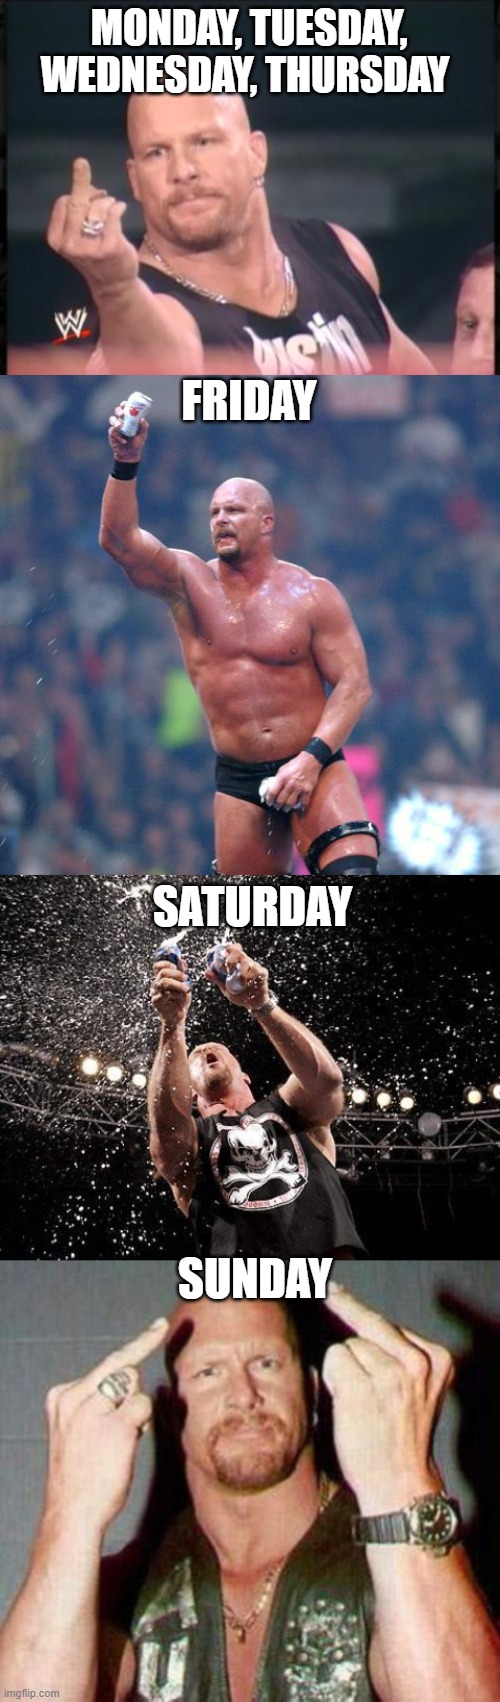 Days of the week portrayed by "stone cold" Steve Austin | MONDAY, TUESDAY, WEDNESDAY, THURSDAY; FRIDAY; SATURDAY; SUNDAY | image tagged in stone cold finger,stone cold steve austin,stone cold beers | made w/ Imgflip meme maker